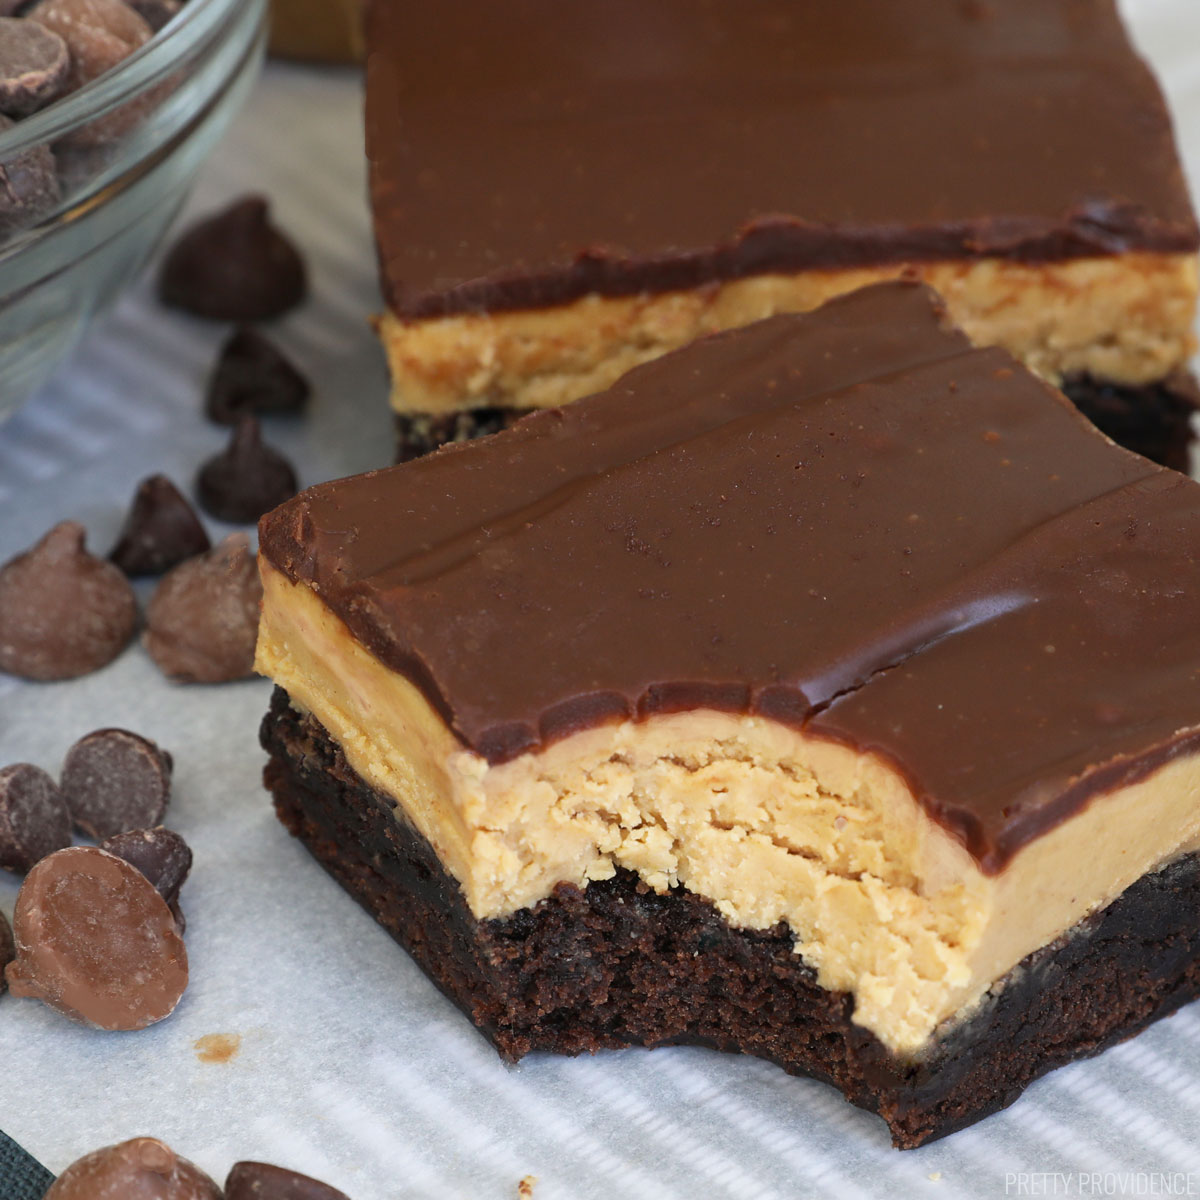 Buckeye brownies with peanut butter layer and chocolate ganache on top.